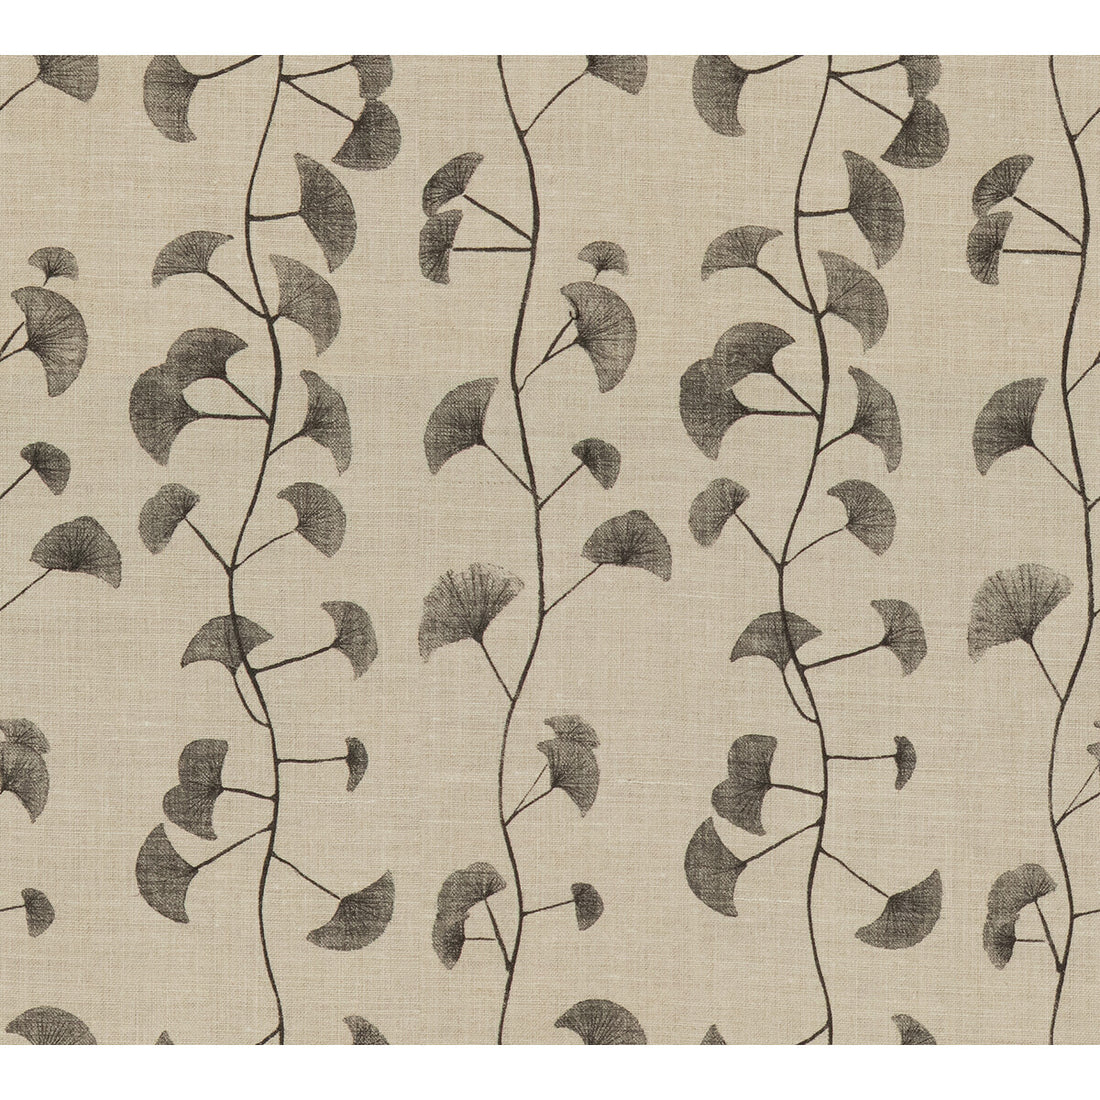 Fans fabric in natural/charcoal color - pattern GWF-2616.118.0 - by Lee Jofa Modern in the Allegra Hicks collection